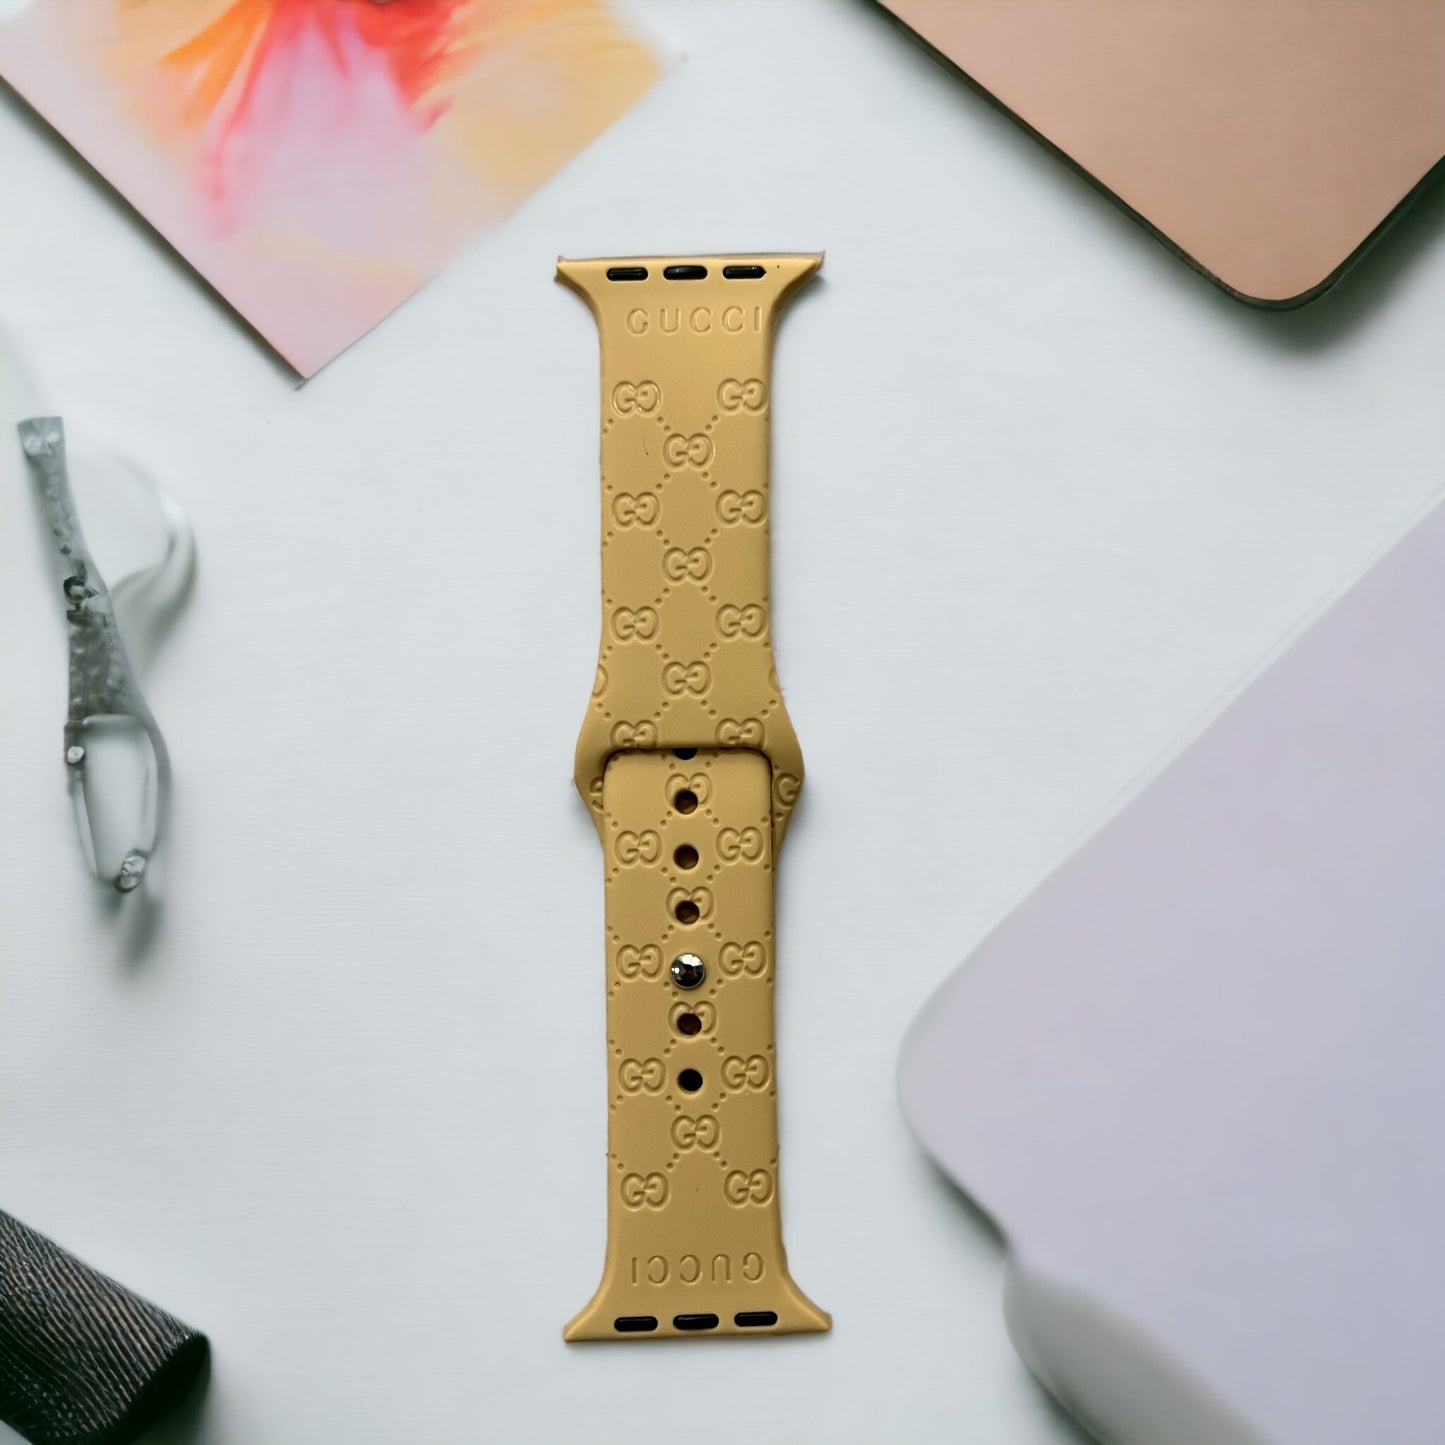 GG Monogram Engraved Silicone Apple Watch Band